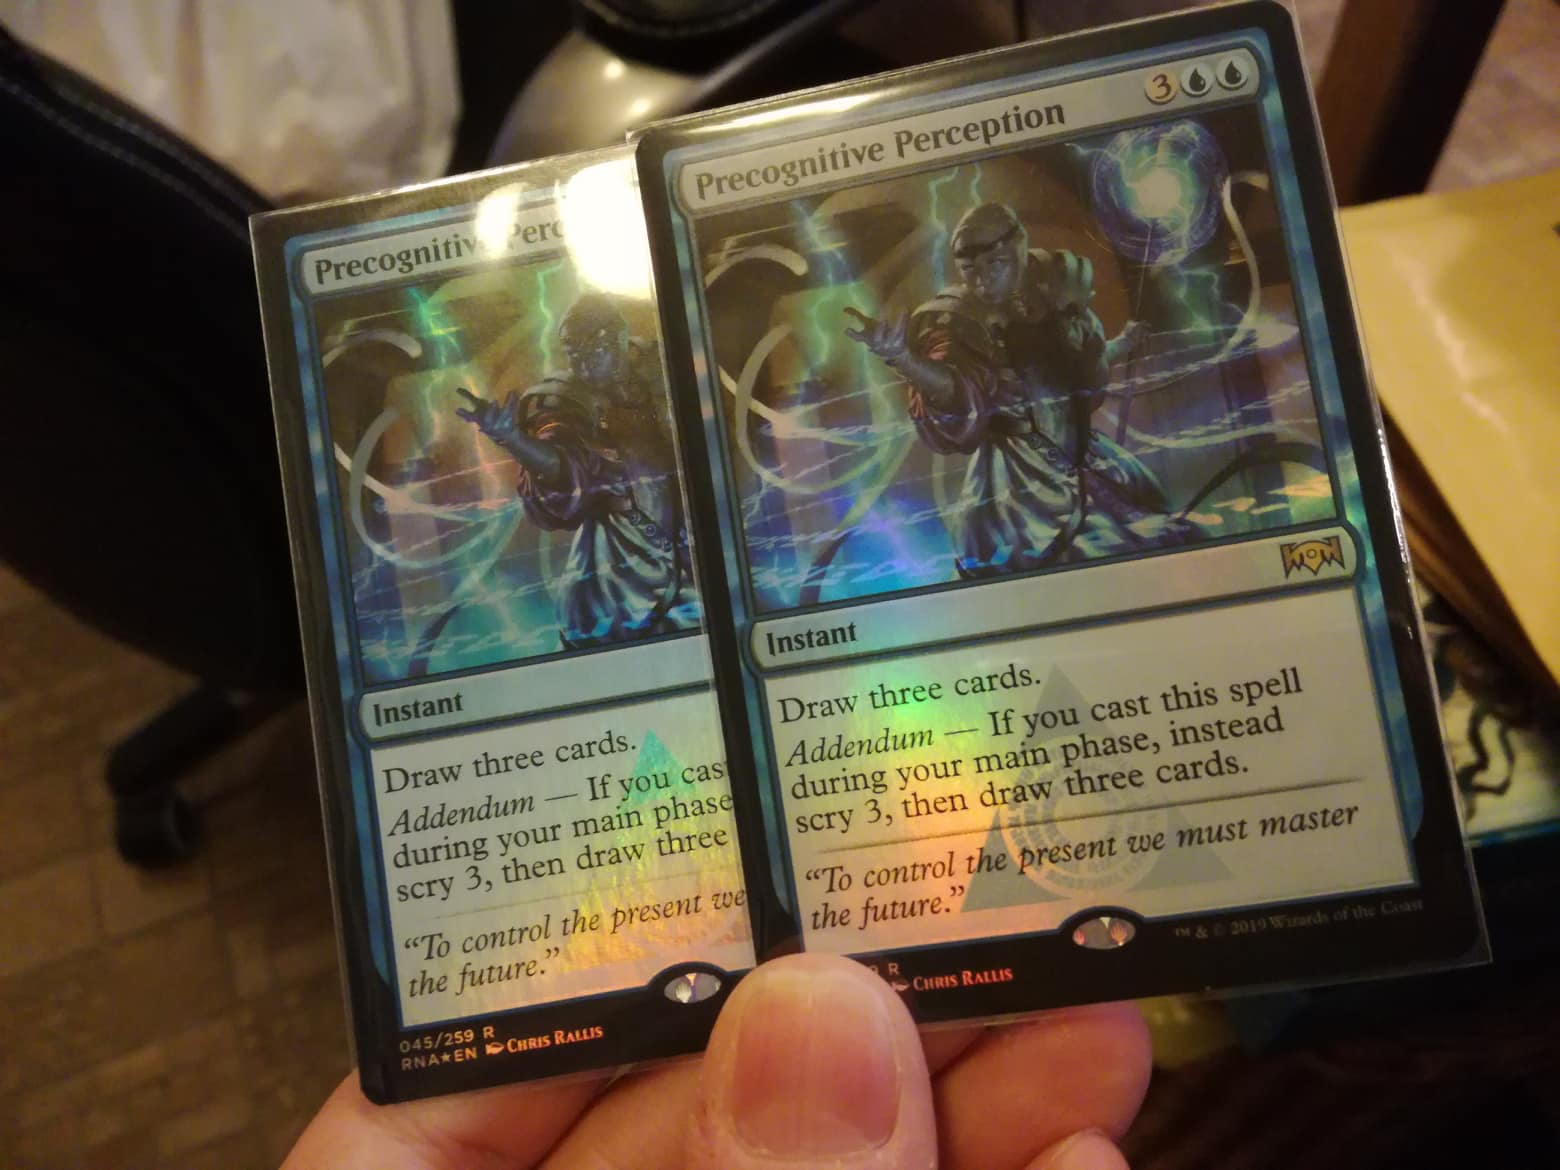 Two foil cards, side by side